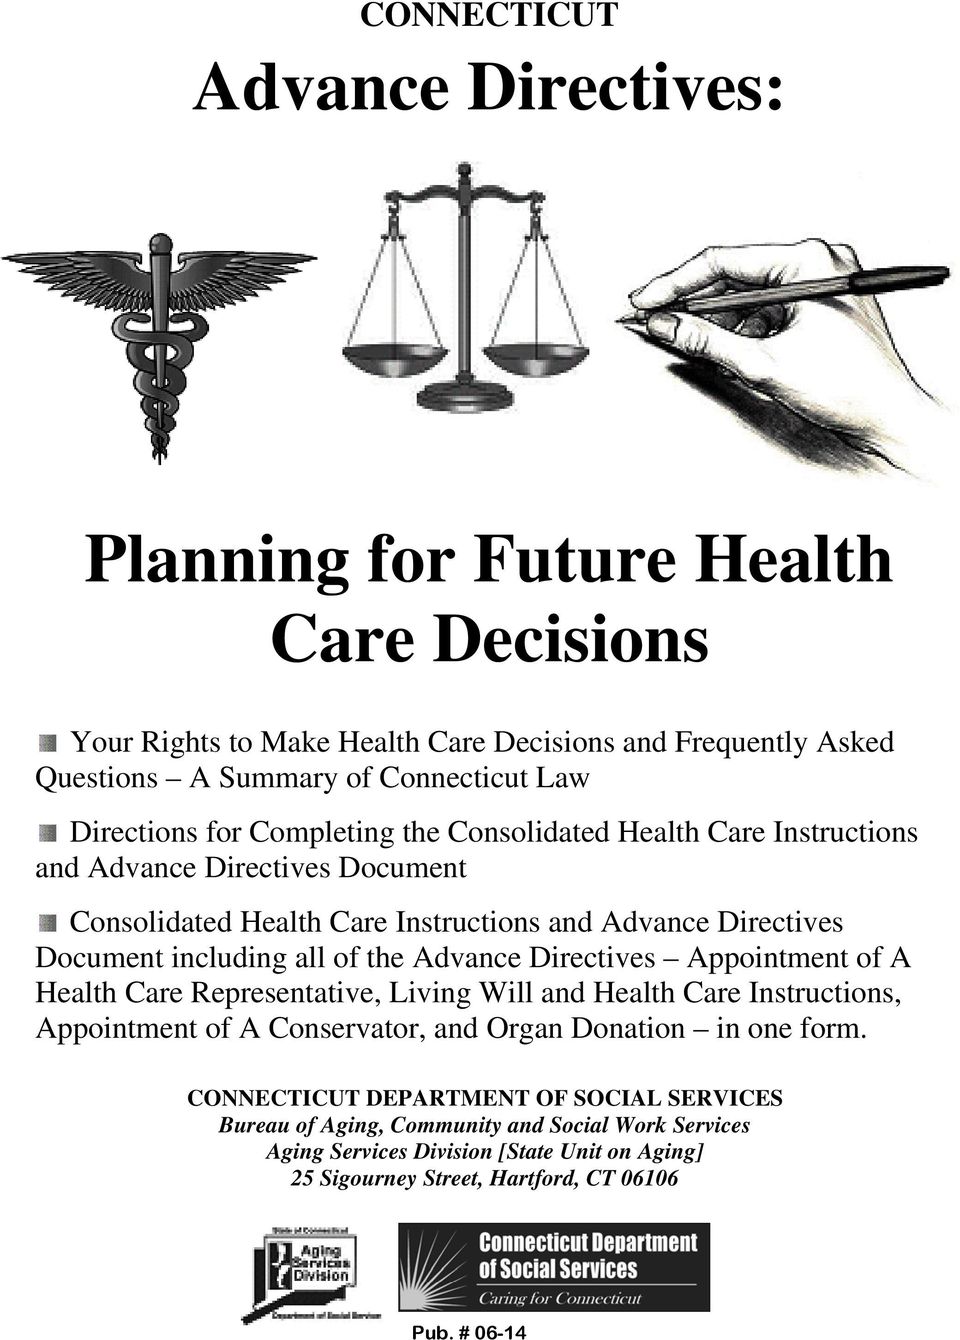 all of the Advance Directives Appointment of A Health Care Representative, Living Will and Health Care Instructions, Appointment of A Conservator, and Organ Donation in one form.